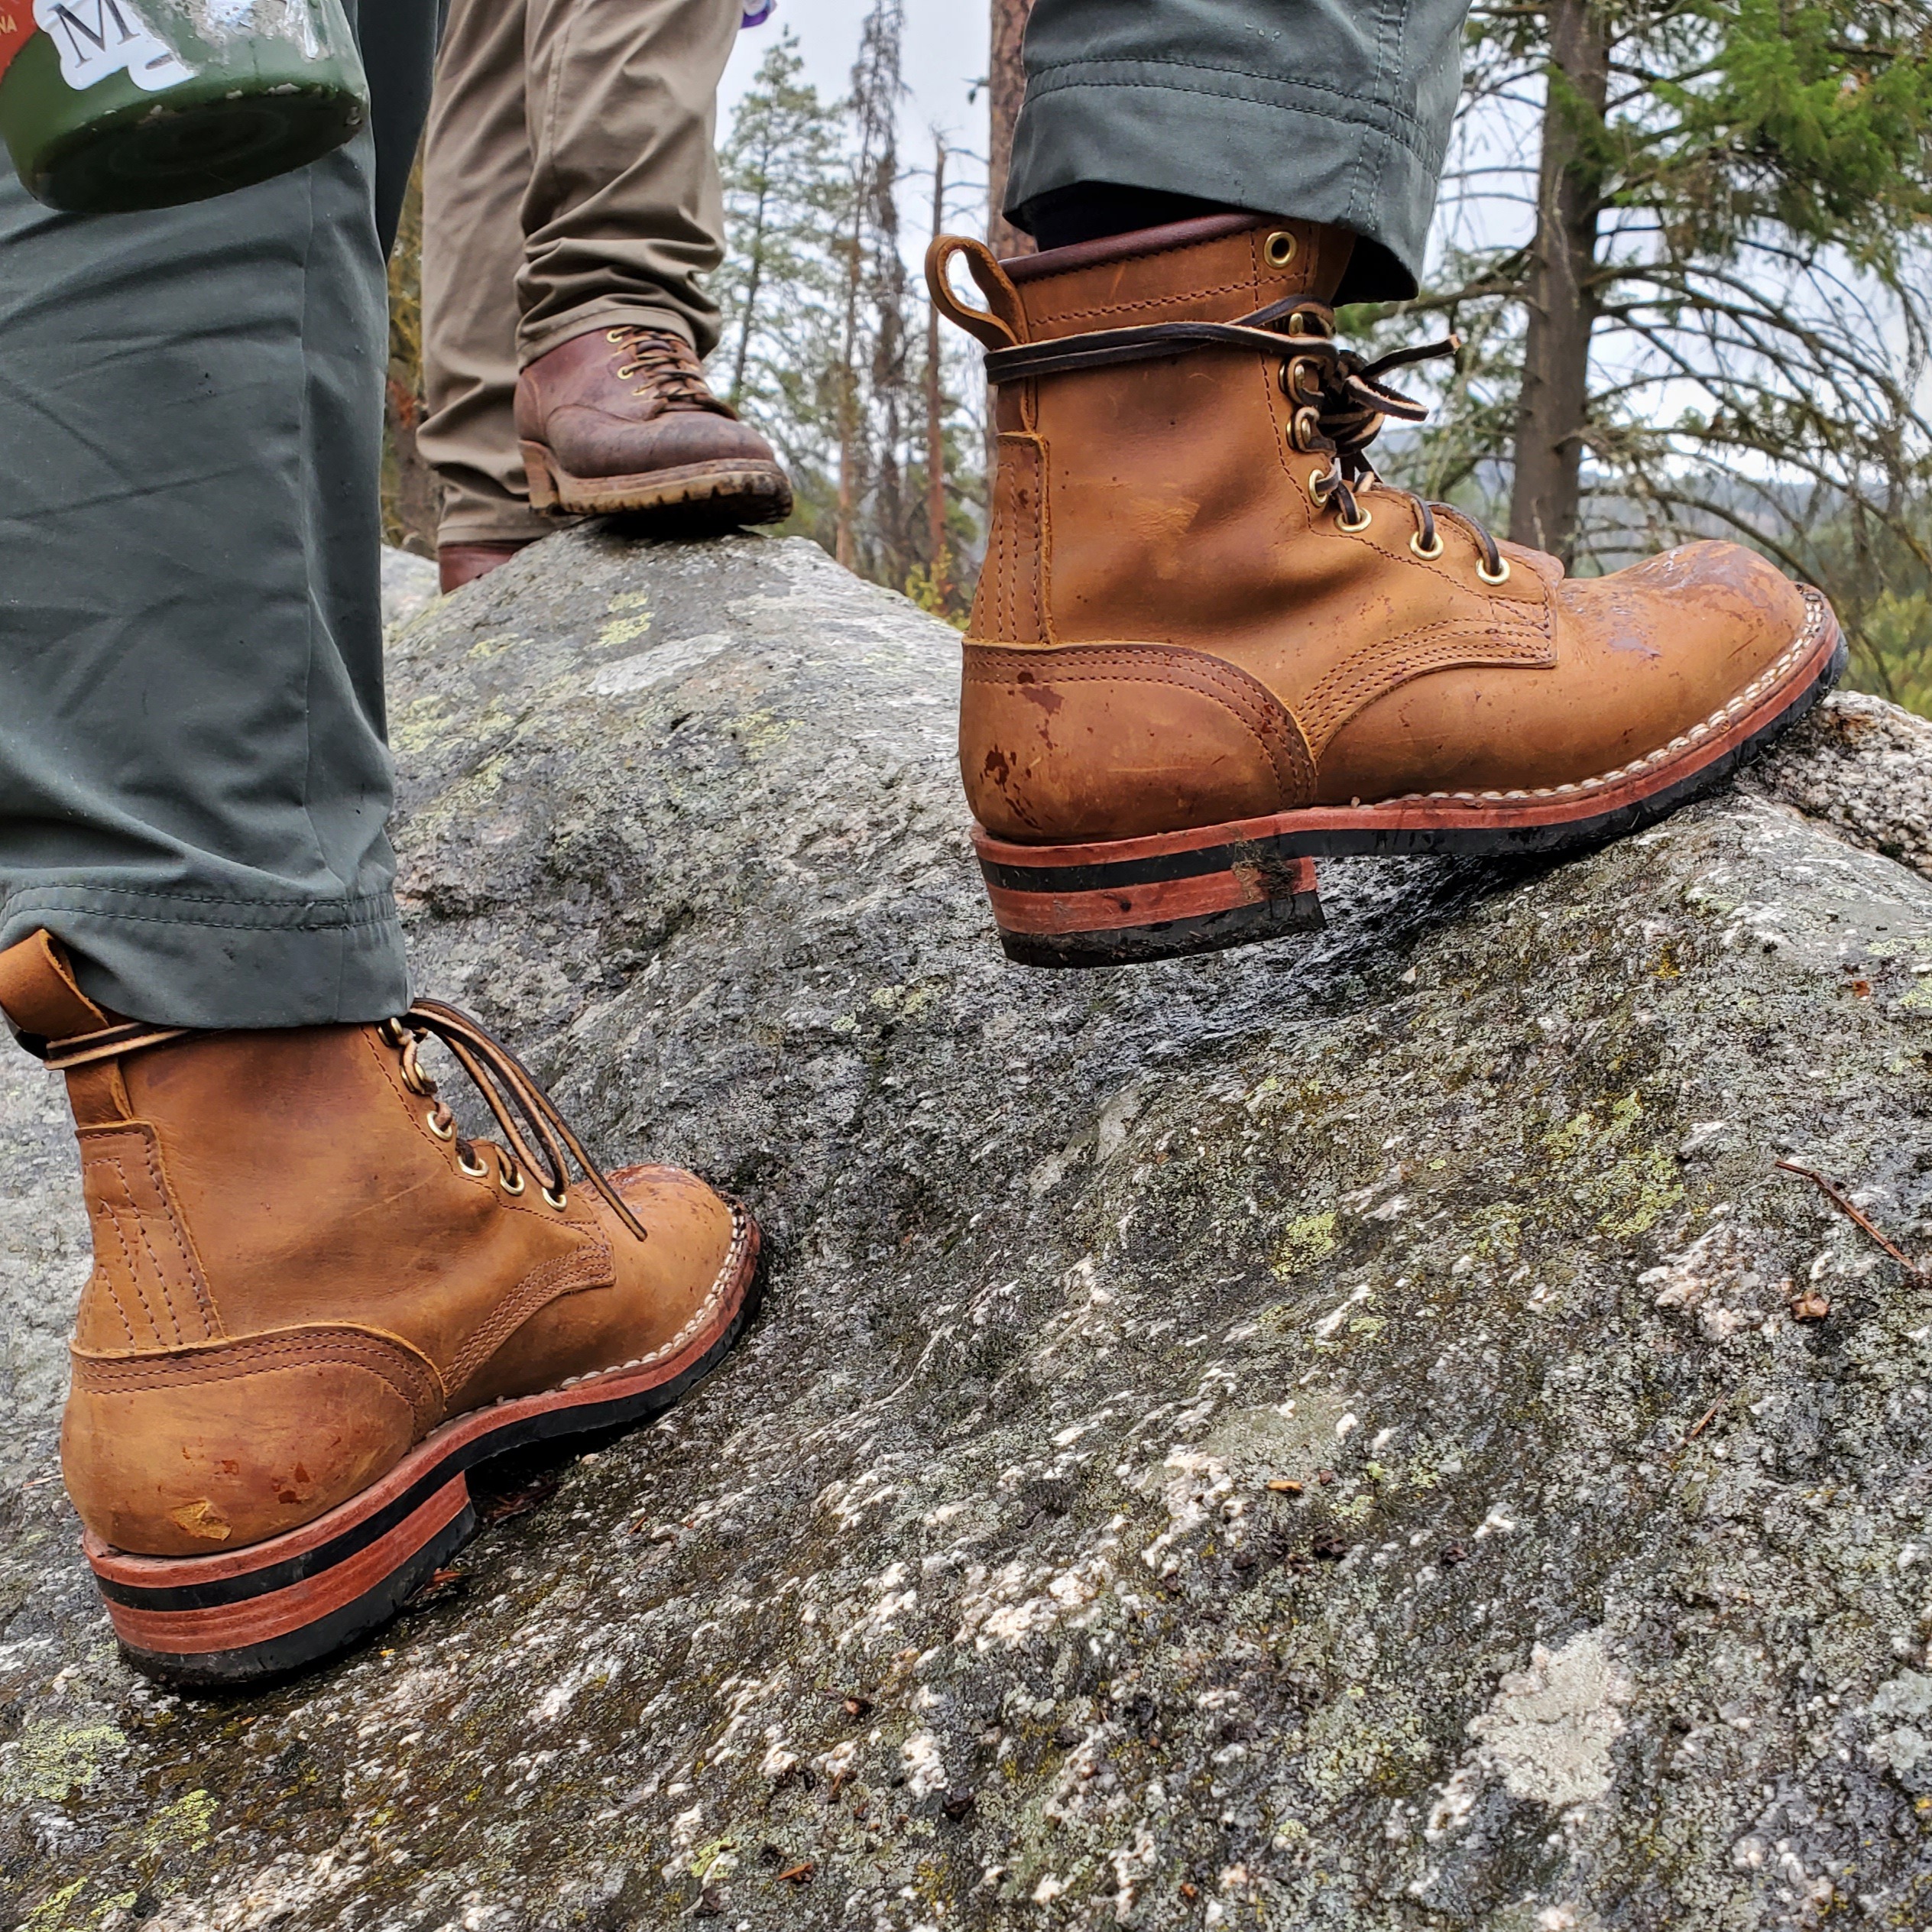 Can Work Boots Be Used for Hiking